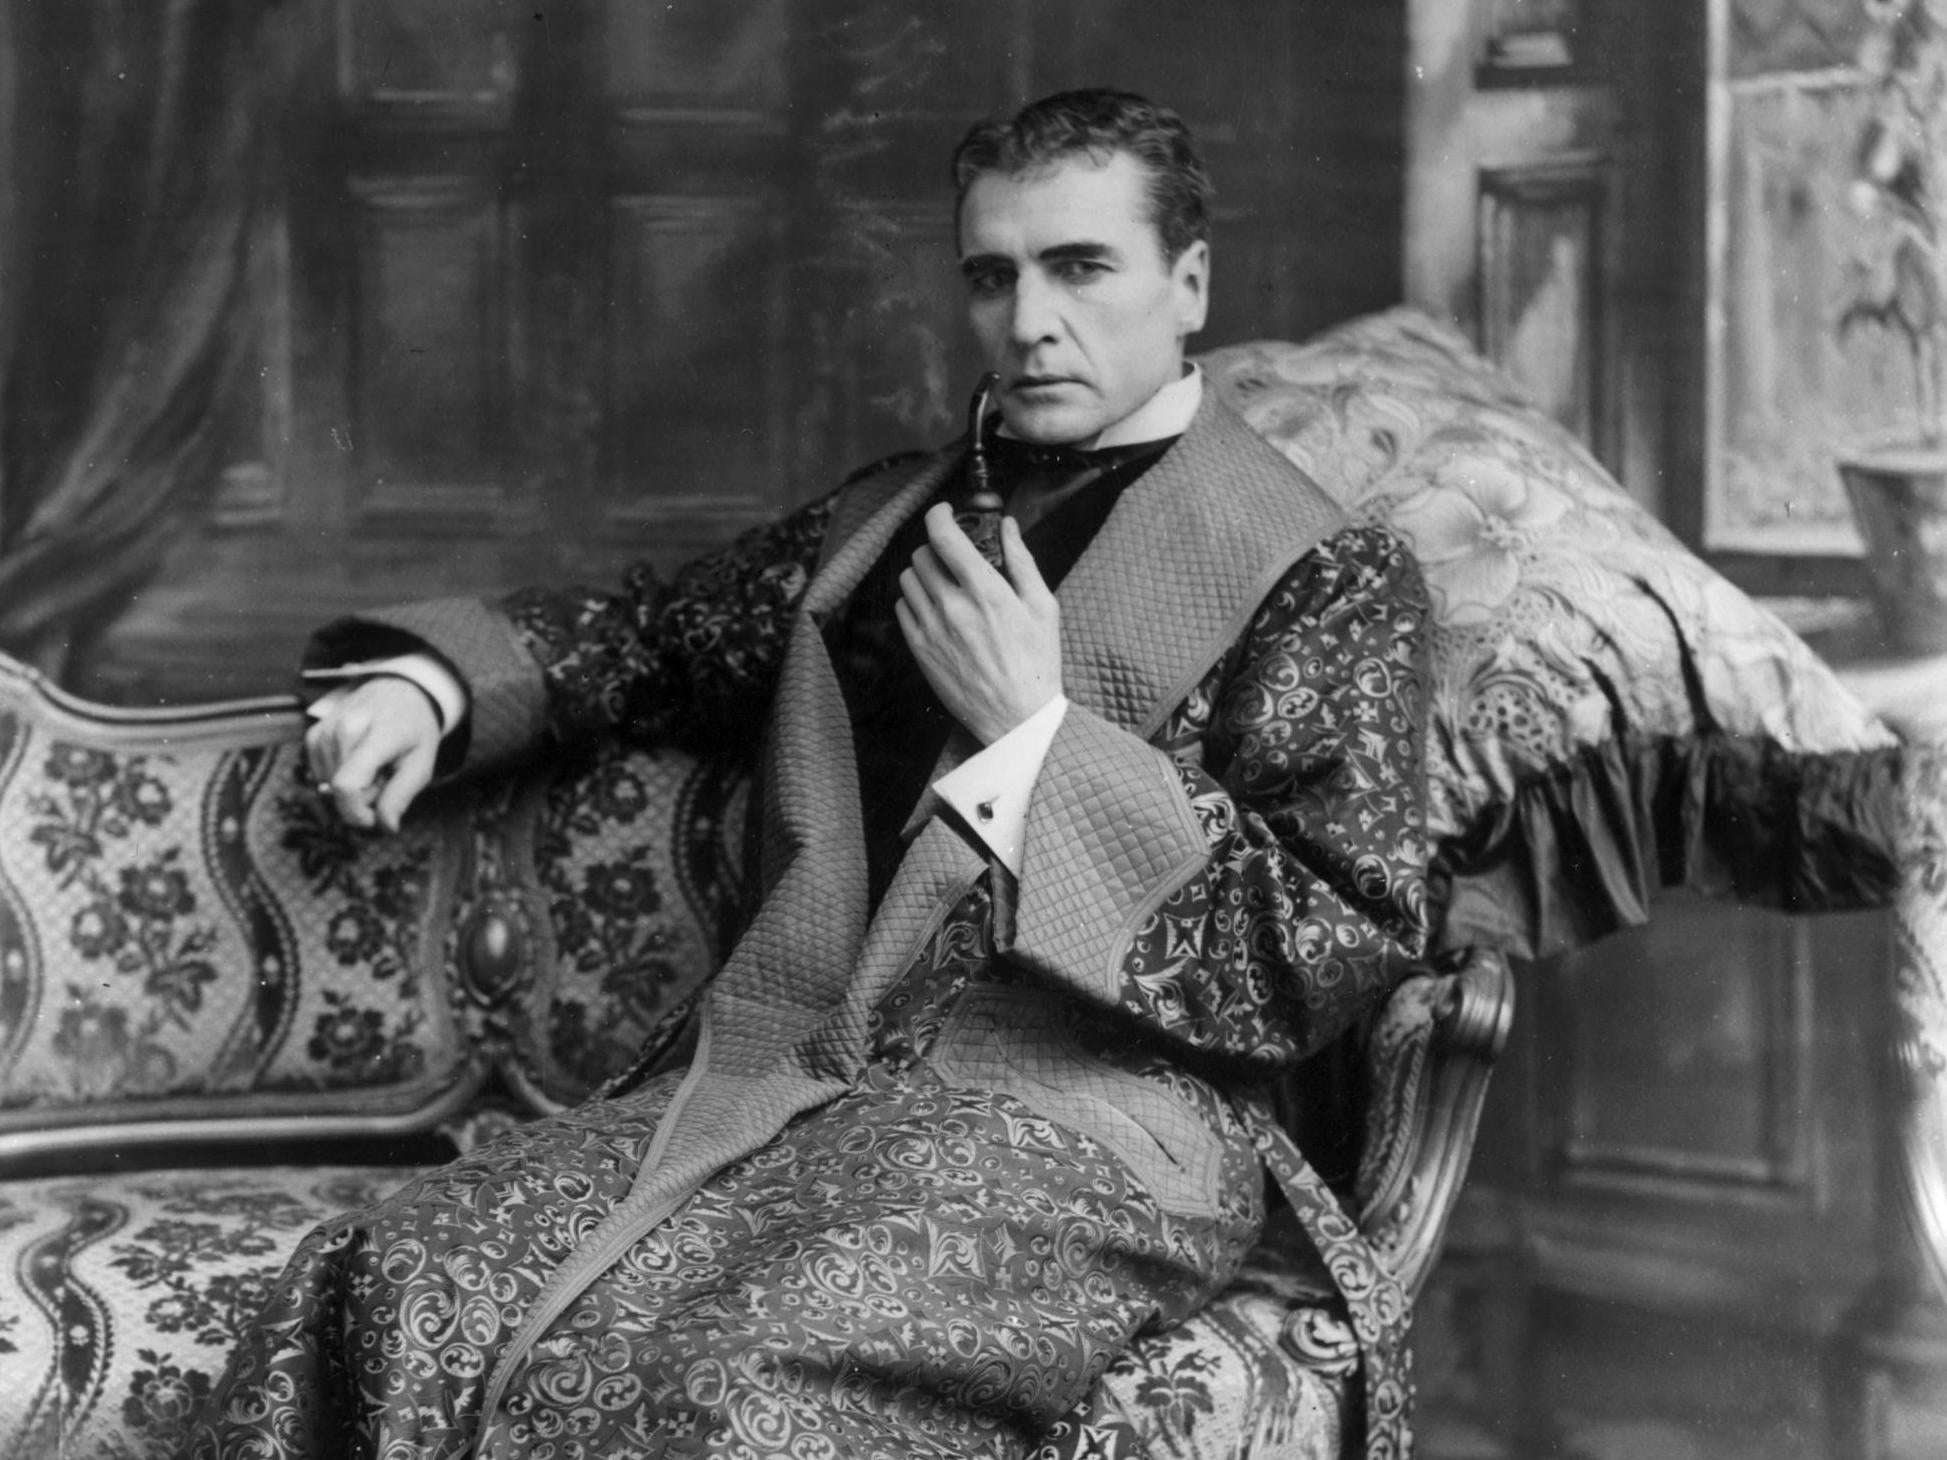 William Gillette as Holmes. A museum at 239 Baker Street is allowed to use 221b